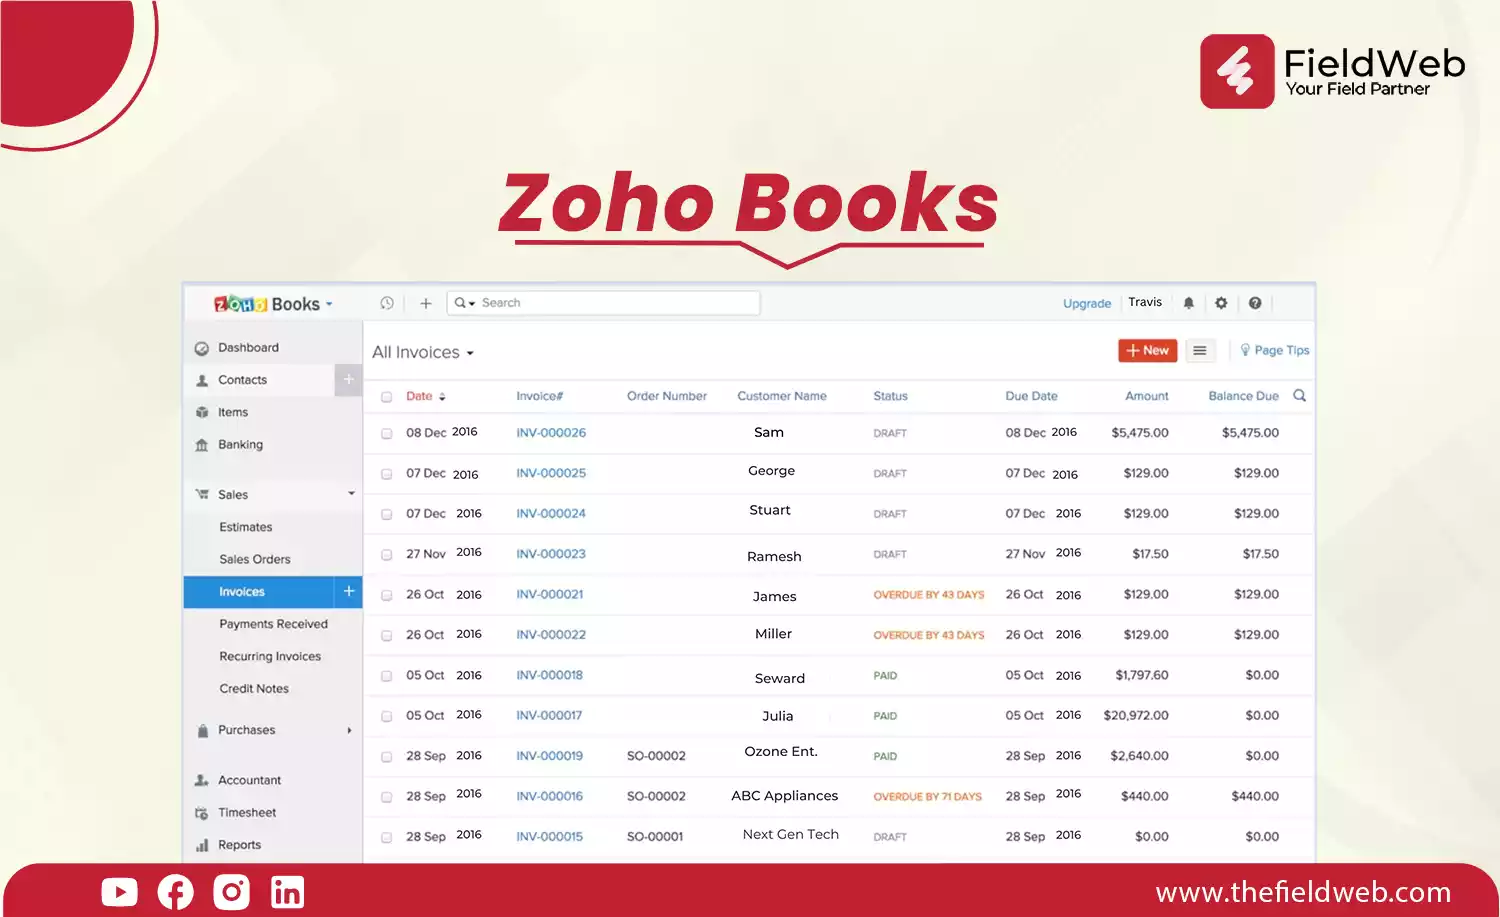 image is displaying the account management features of zohobooks